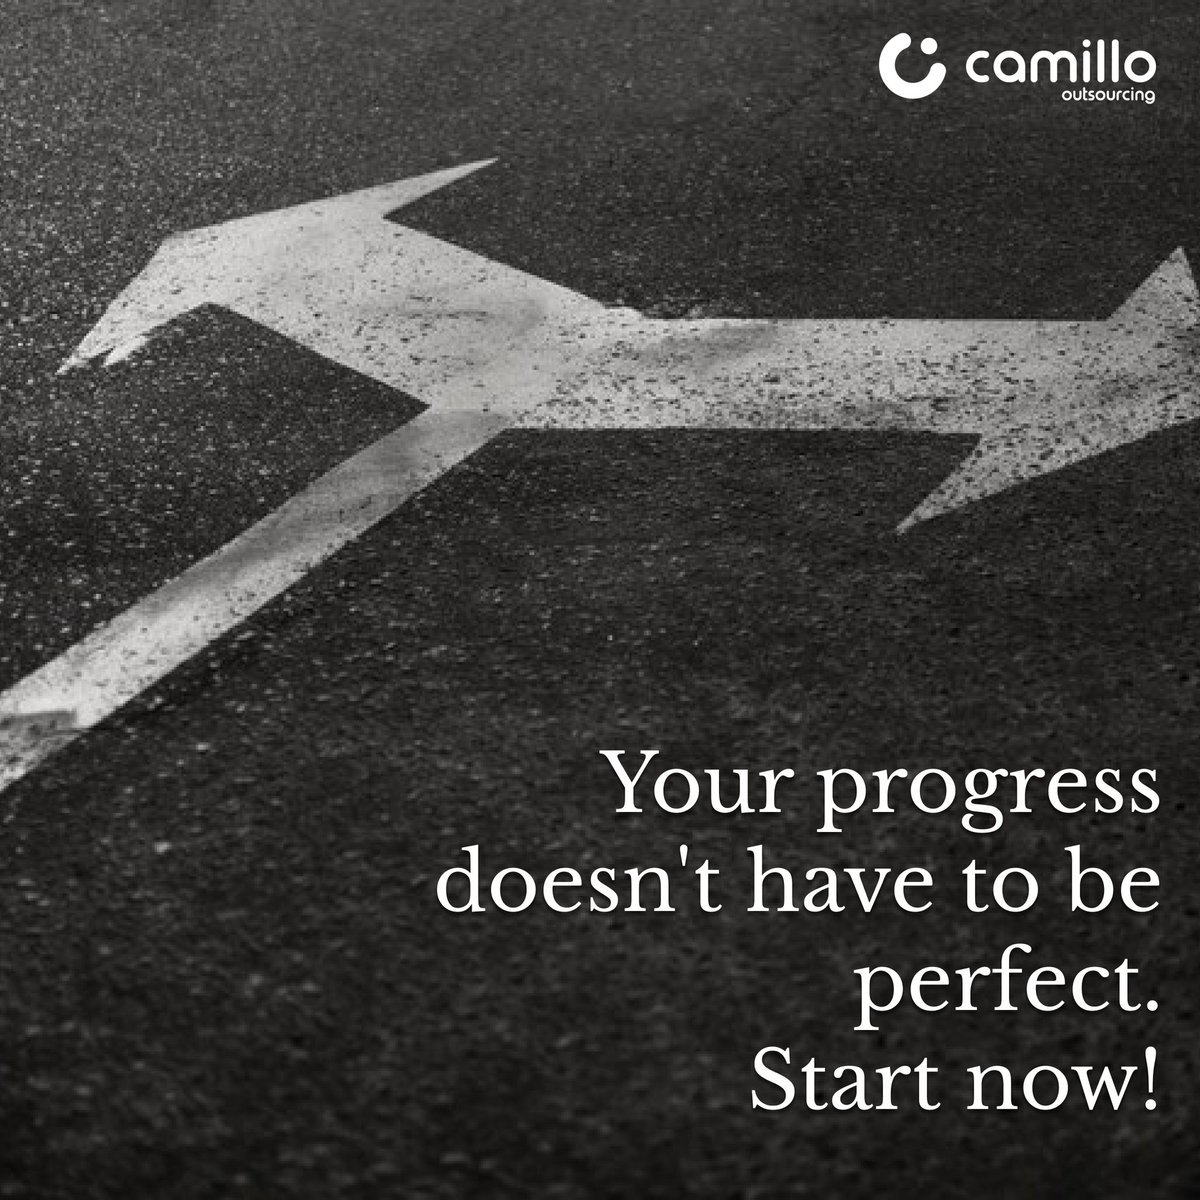 Start now!
Progress is progress.
Embrace your Journey.

#camillo #outsourcing #outsource #progress #businessgrowth #businessowner